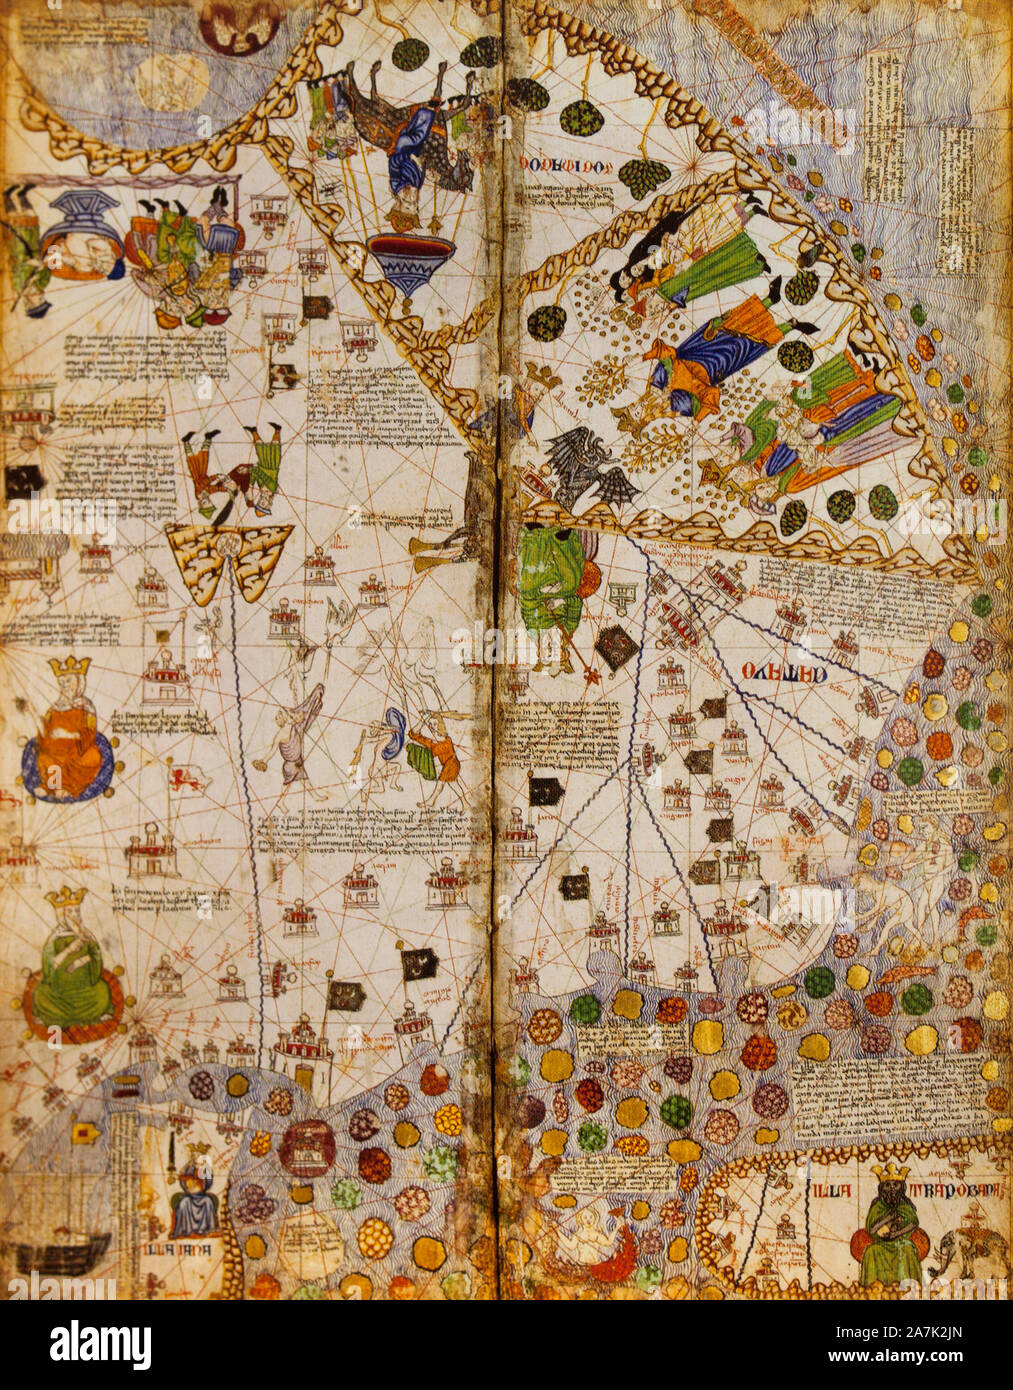 Catalan Atlas, Medieval world map created in 1375. Fragment. Reproduction at House Museum of Columbus, Valladolid, Spain Stock Photo